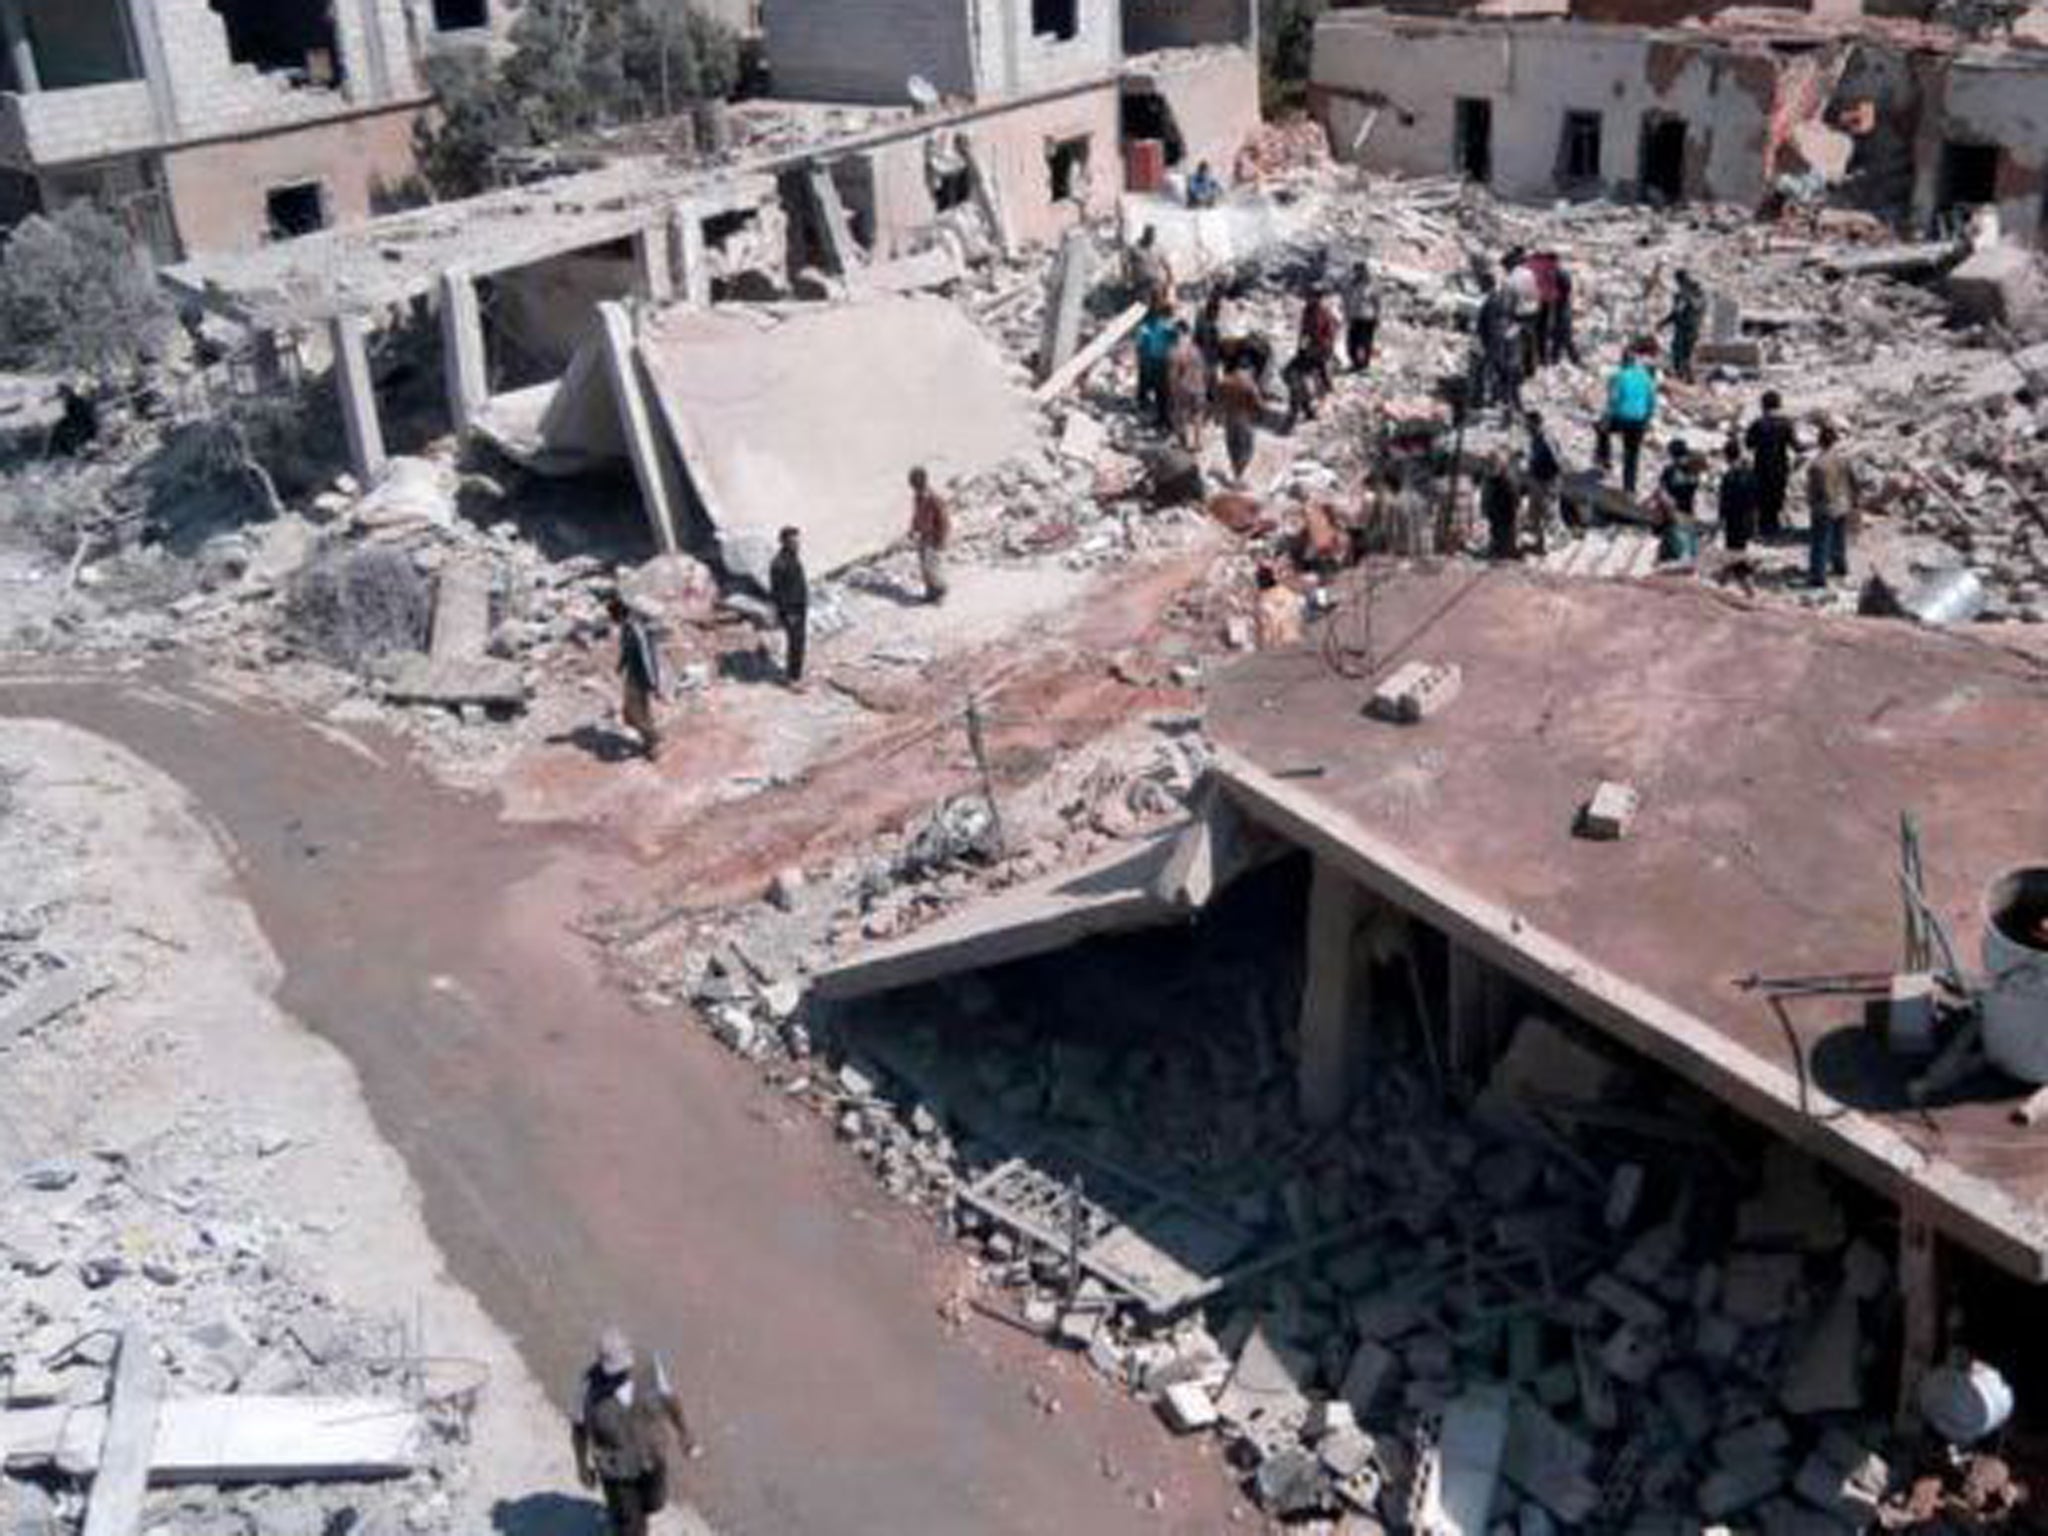 Syrian citizens inspect the site of an air strike in Qusair last month